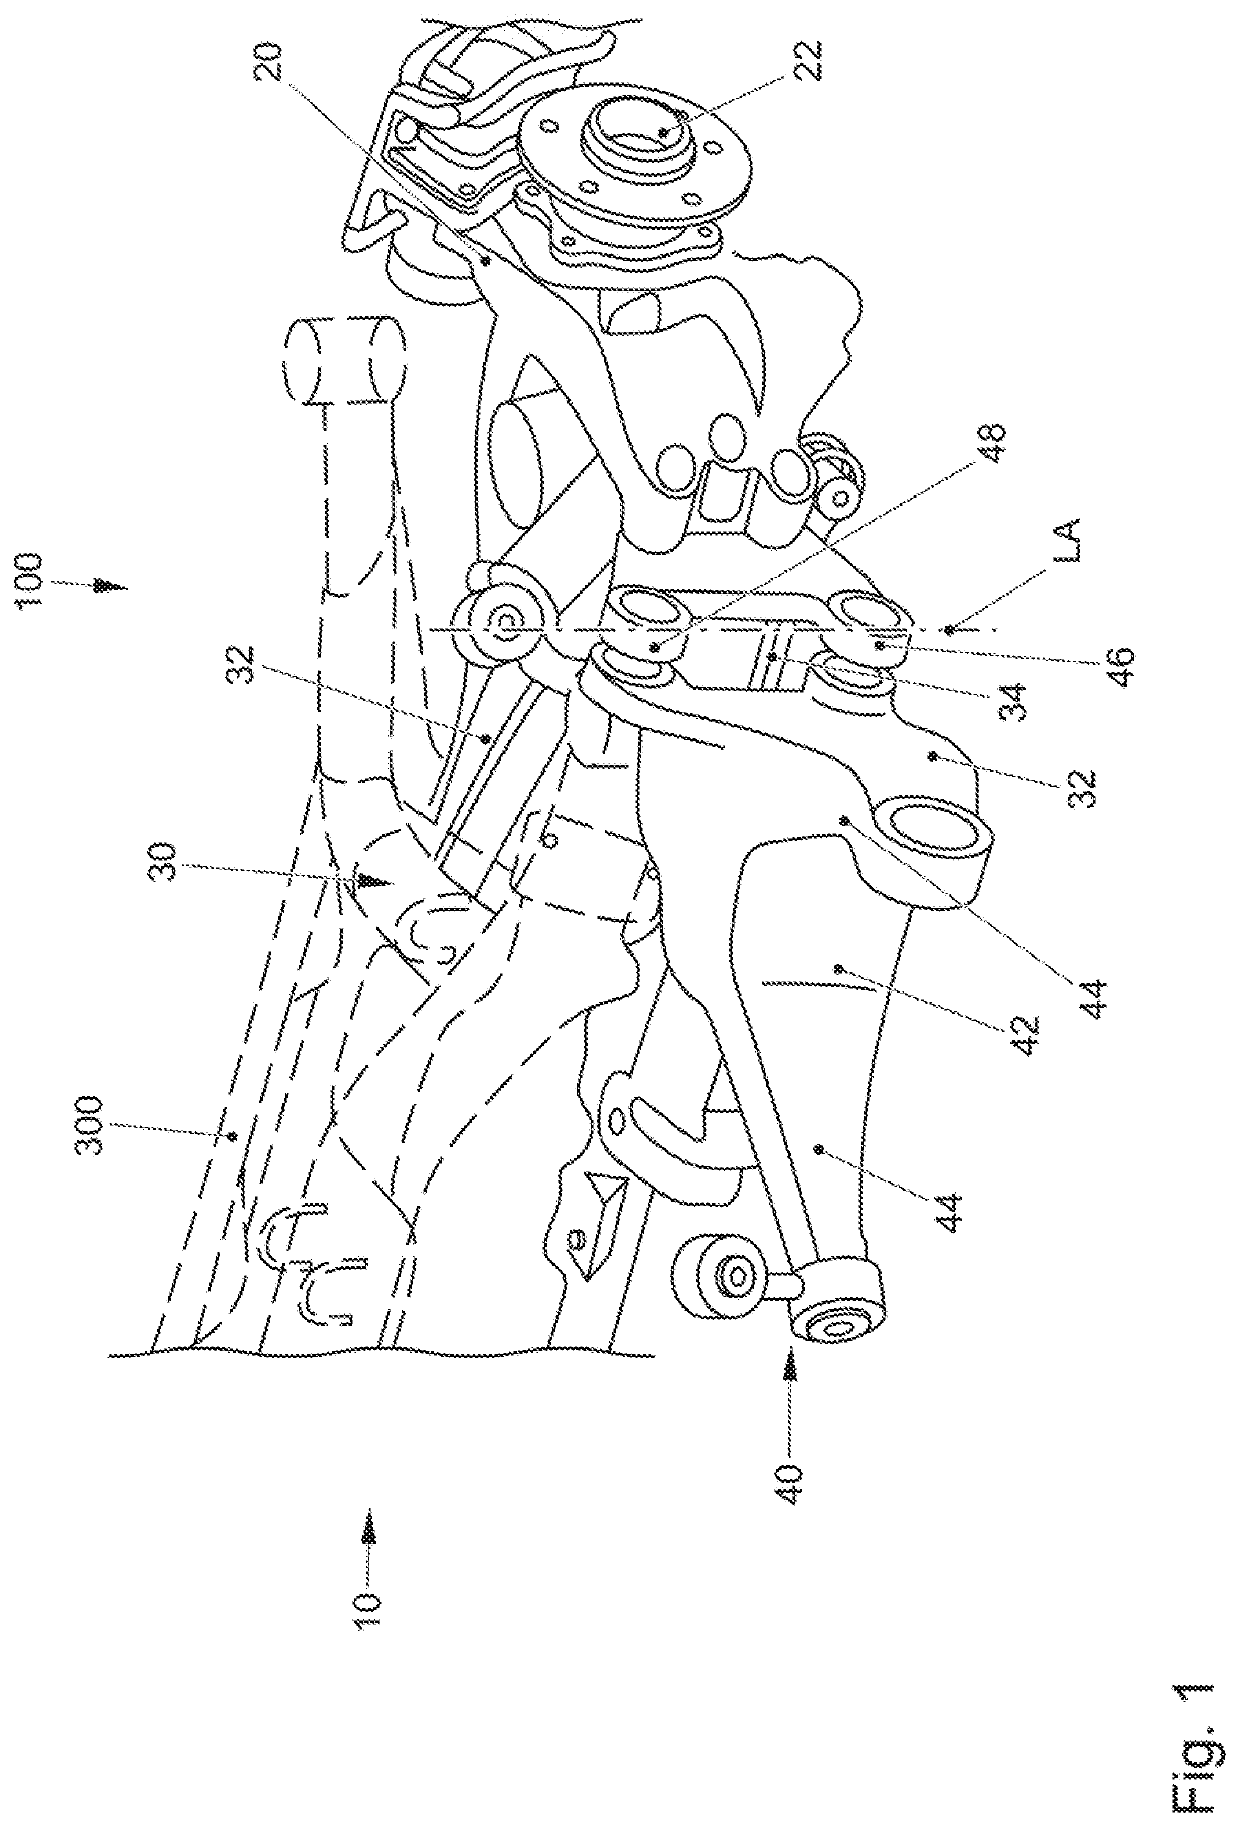 Wheel suspension for the rear axle of a vehicle